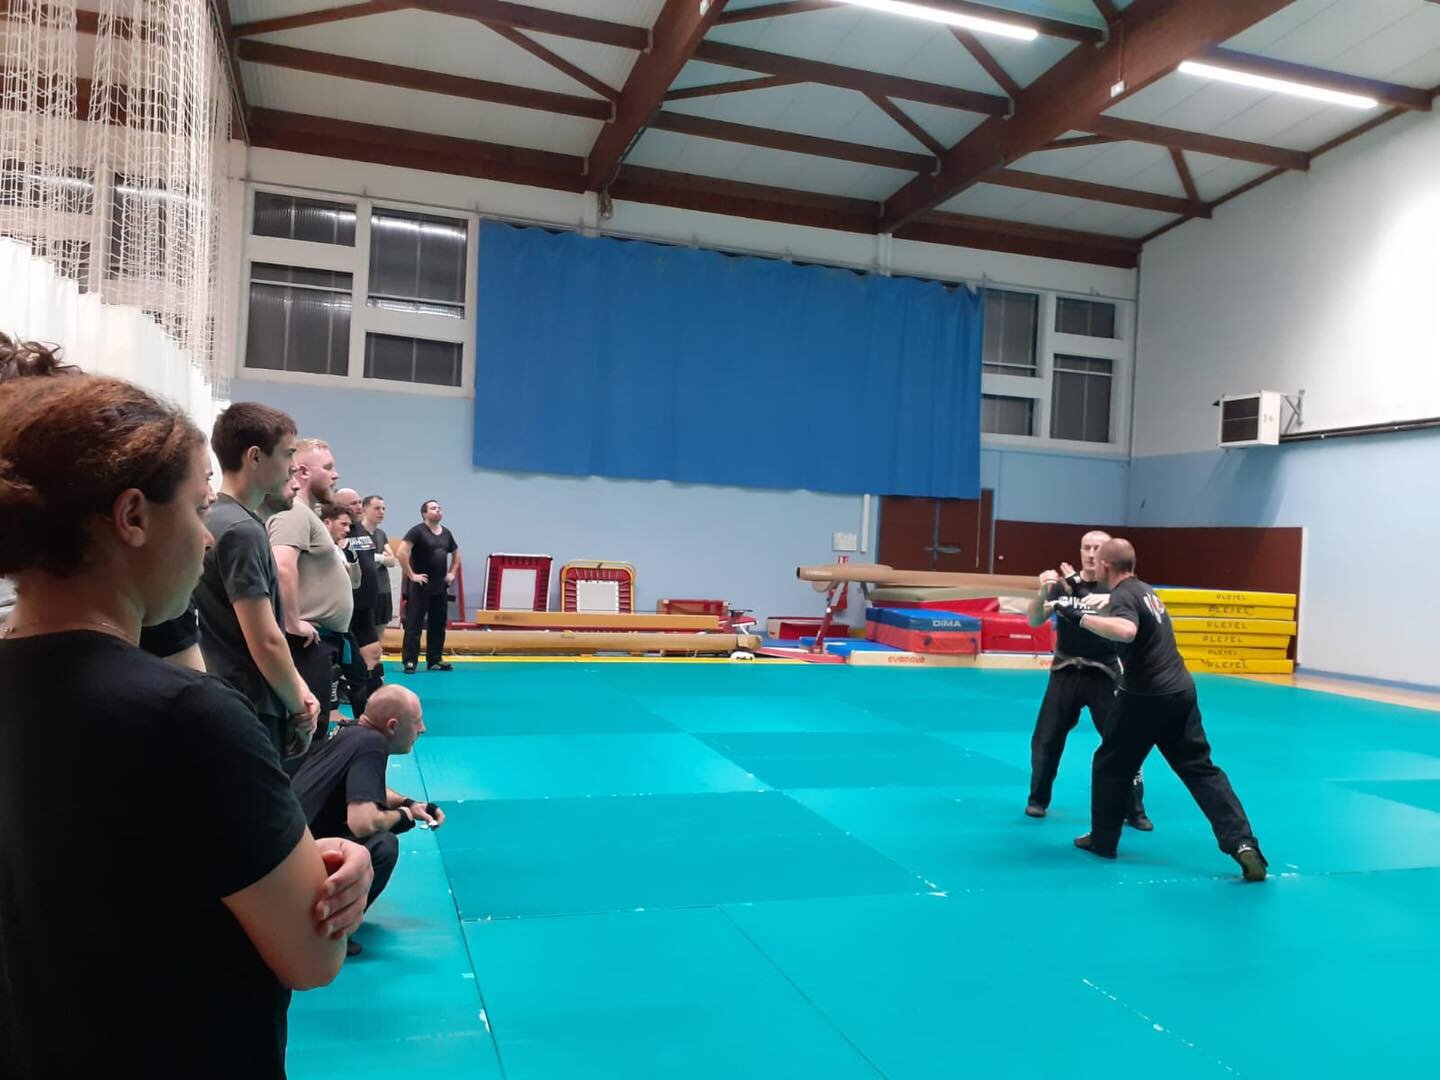 Cours adulte &agrave; Nerac !! Anthony aux commandes 👍👍

#kravmaga 
#seldefense